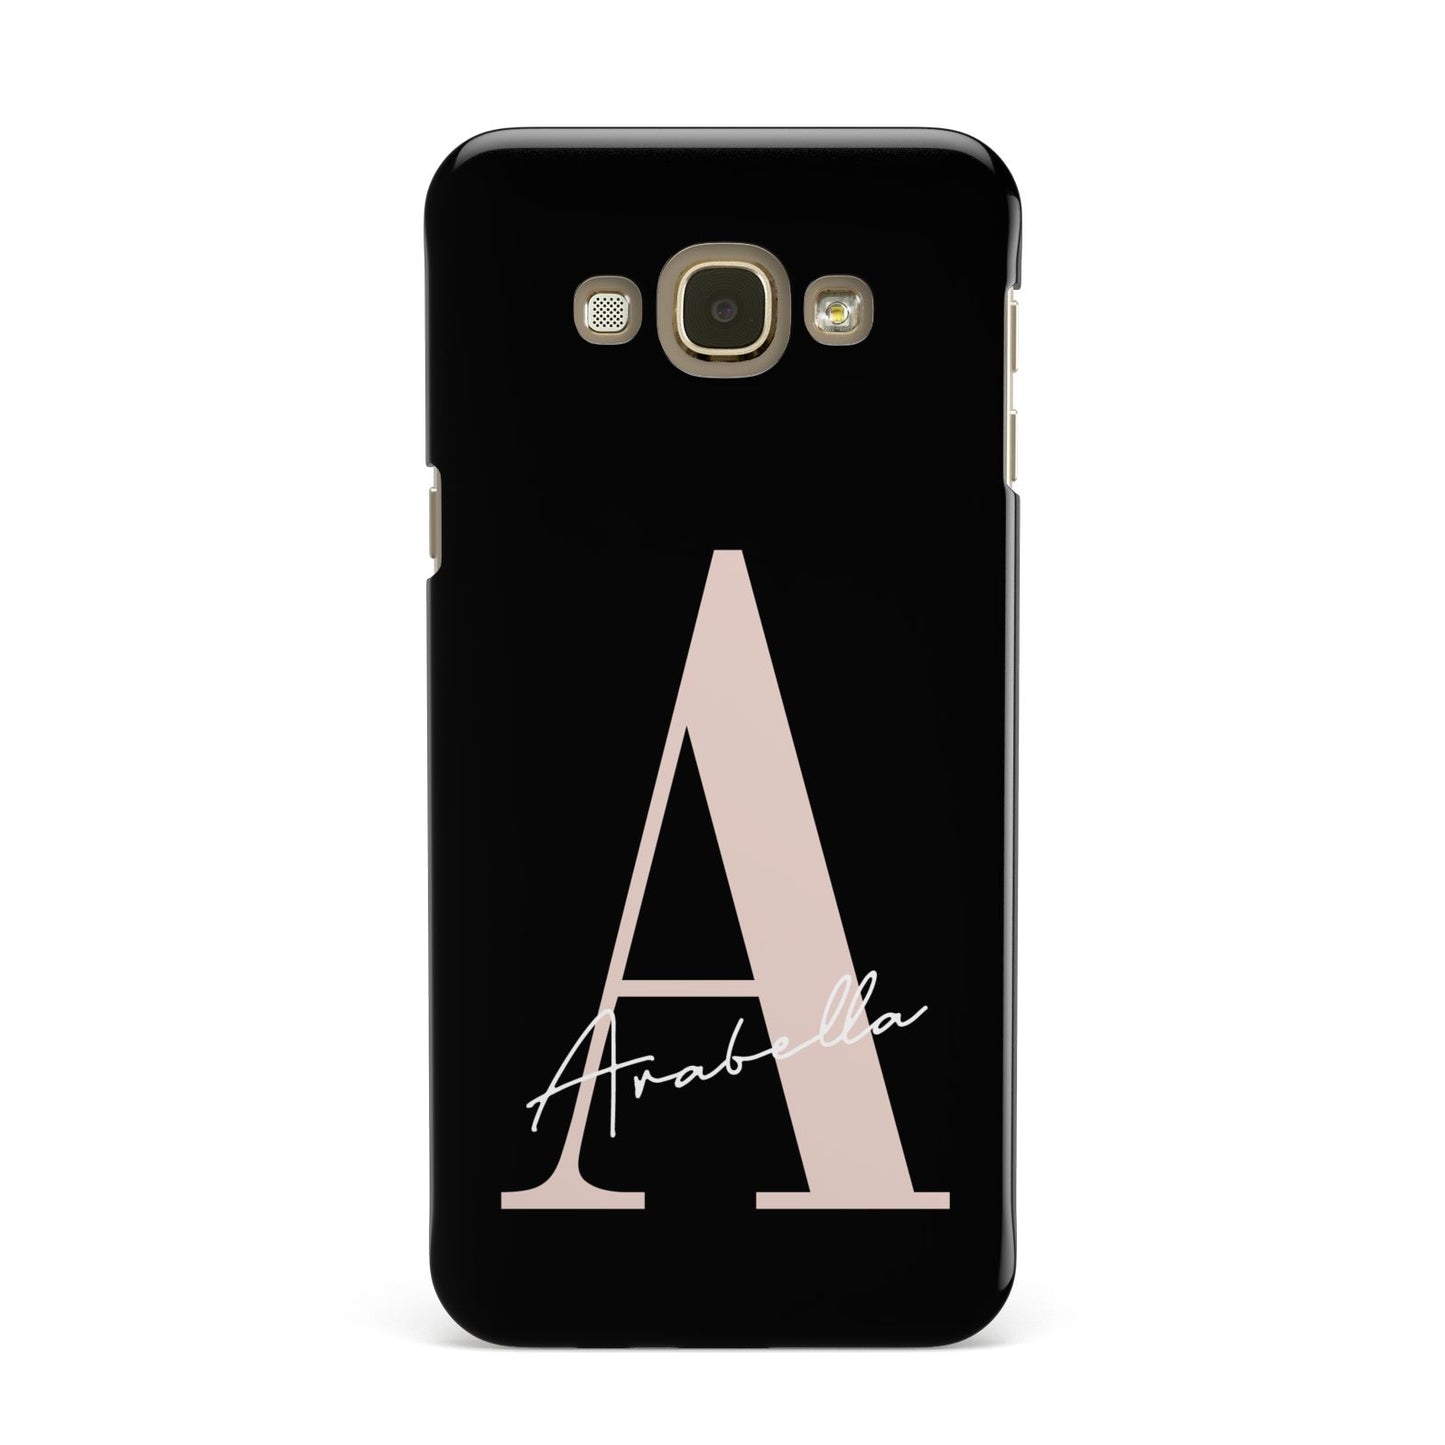 Personalised Black Pink Initial Samsung Galaxy A8 Case